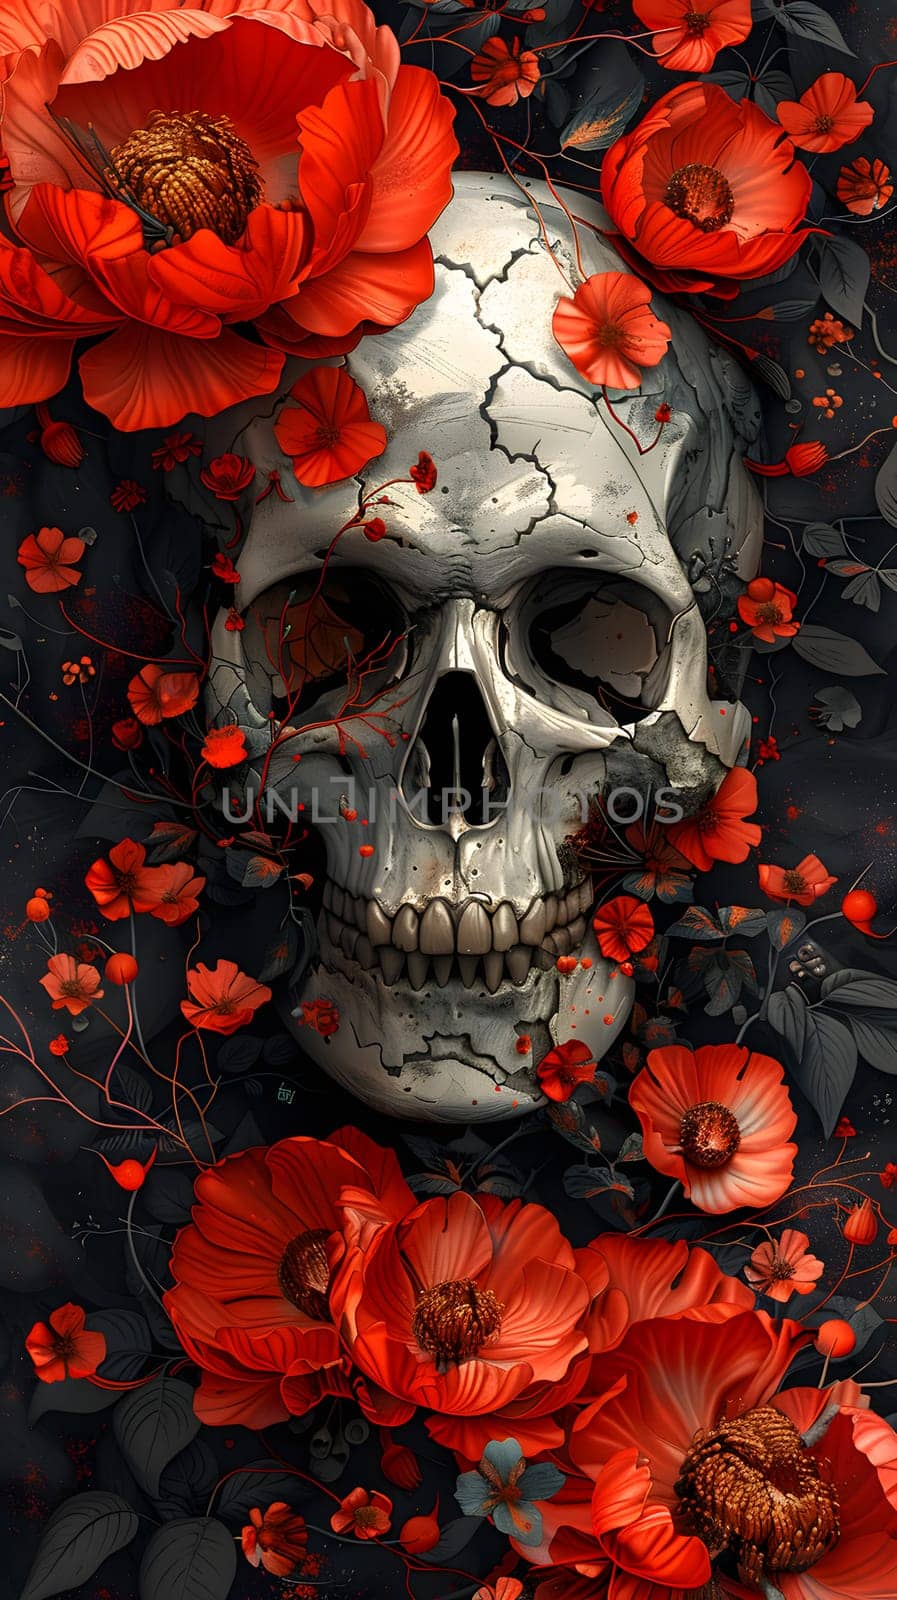 A skull with a jaw bone is depicted surrounded by vibrant red flowers in a visually striking painting on a black background, showcasing the beauty of art and the contrast between life and death